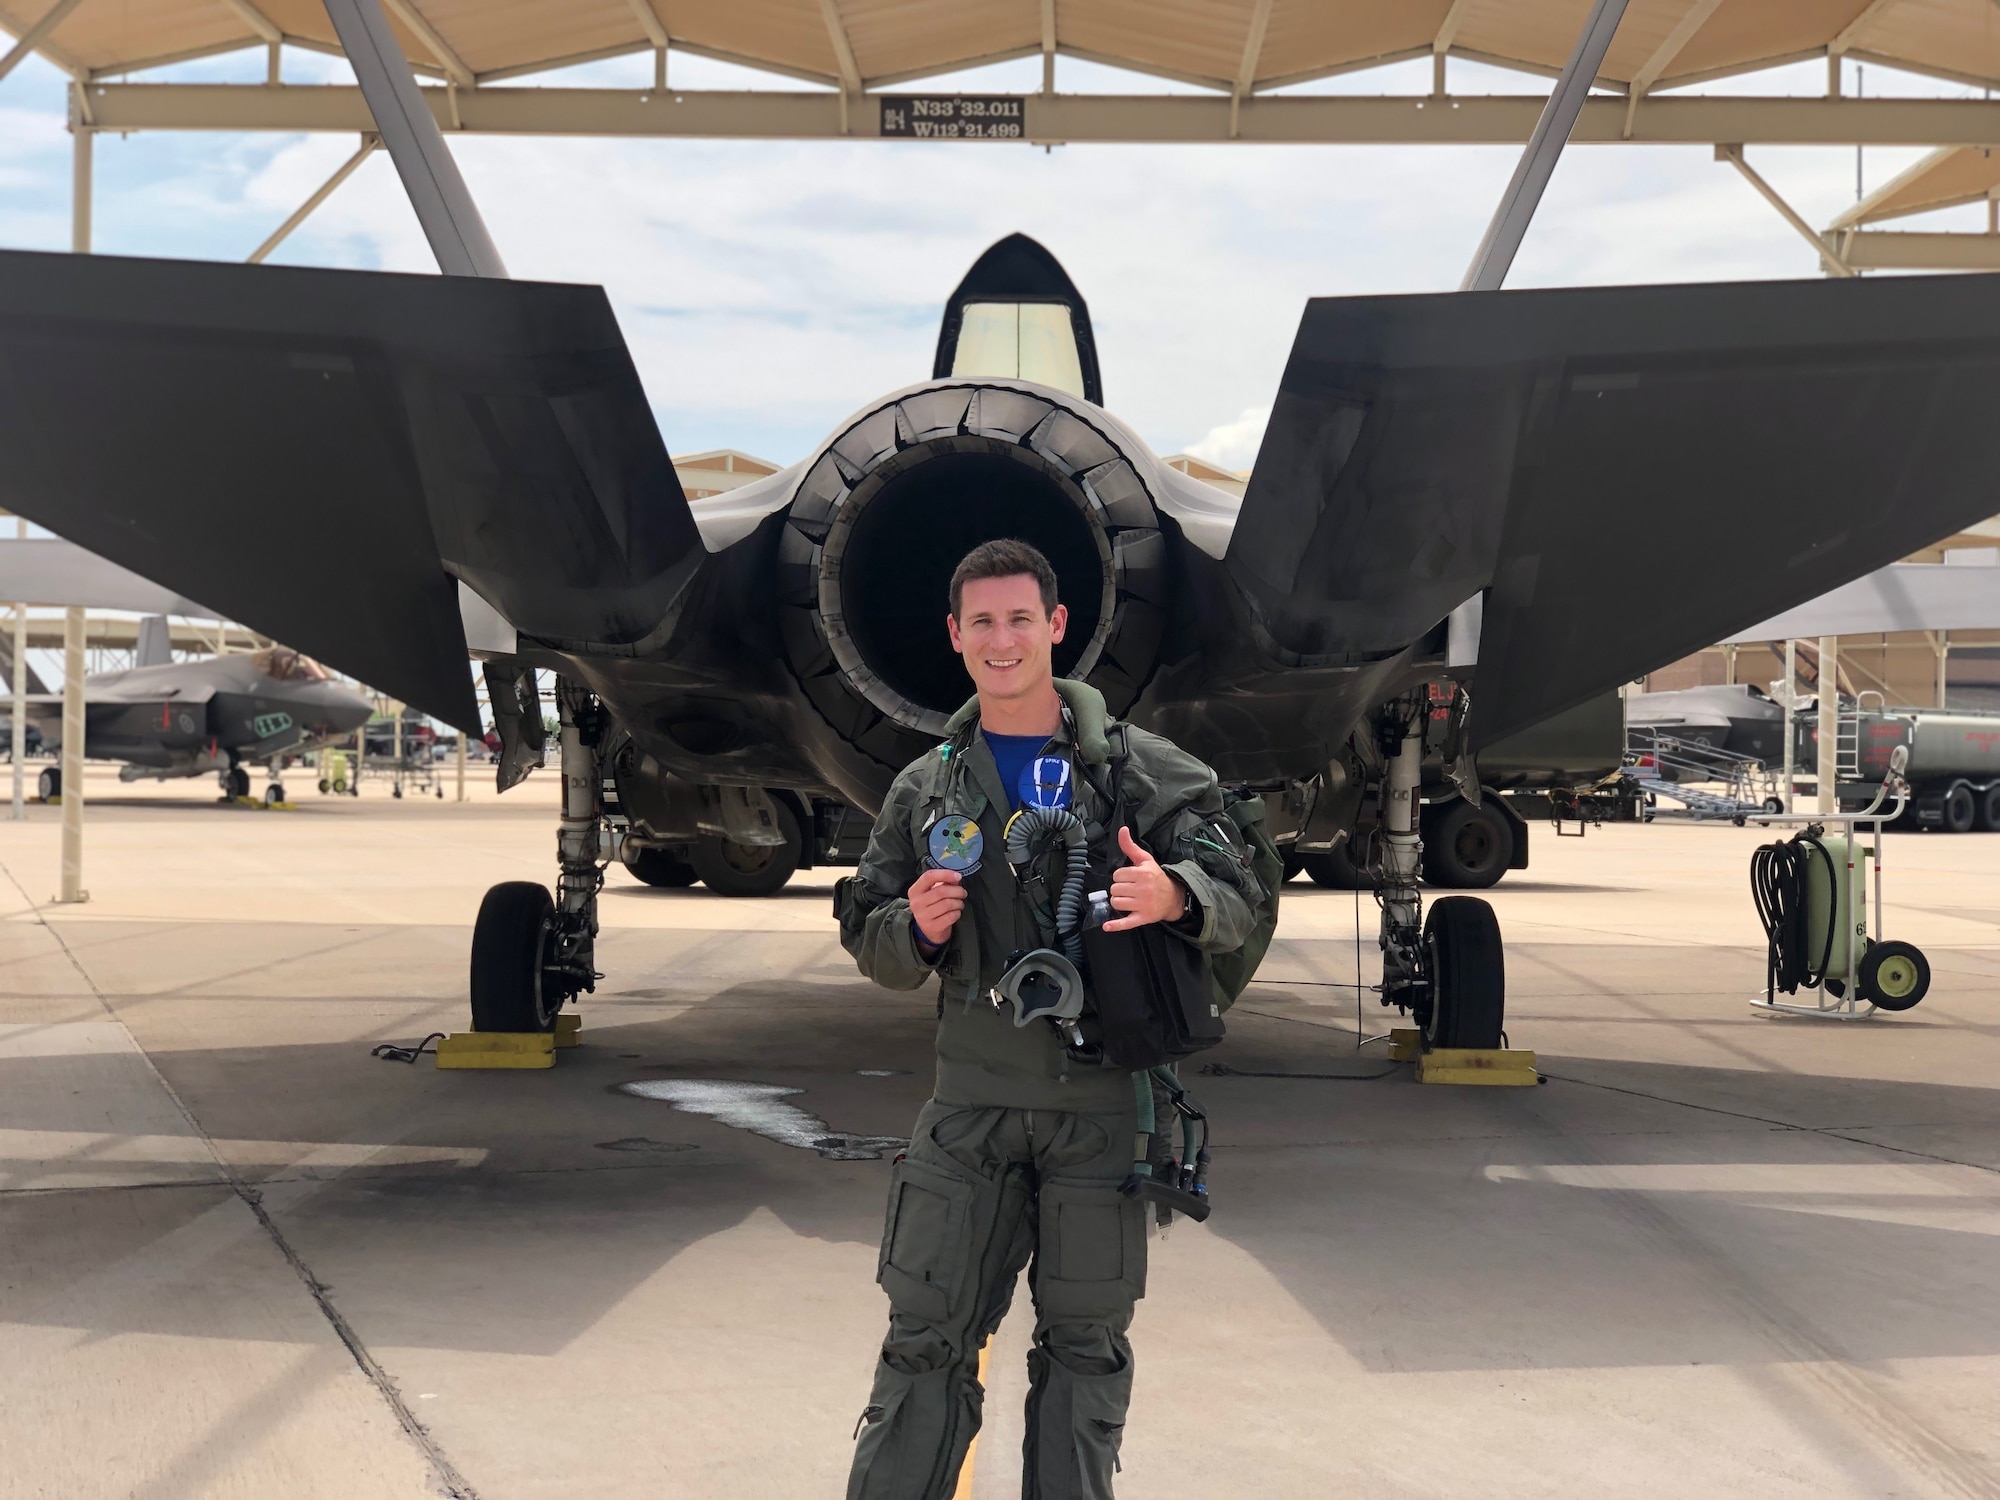 U.S. Air Force Capt. Joseph “Sic” Scerra, an F-15C Eagle pilot assigned to the 159th Fighter Squadron, 125th Fighter Wing, Florida Air National Guard, is pictured before an F-35A Lightning II ahead of his historic flight near Luke Air Force Base, AZ, Aug. 13, 2021. Scerra is the first 159th FS pilot to complete a sortie flying an F-35A. The milestone arrived on the heels of the release of the final Environmental Impact Statement confirming Jacksonville as the next home of the F-35A Lightning II. The new aircraft will replace the legendary F-15C Eagle currently flown by the 125th Fighter Wing. (Courtesy photo)